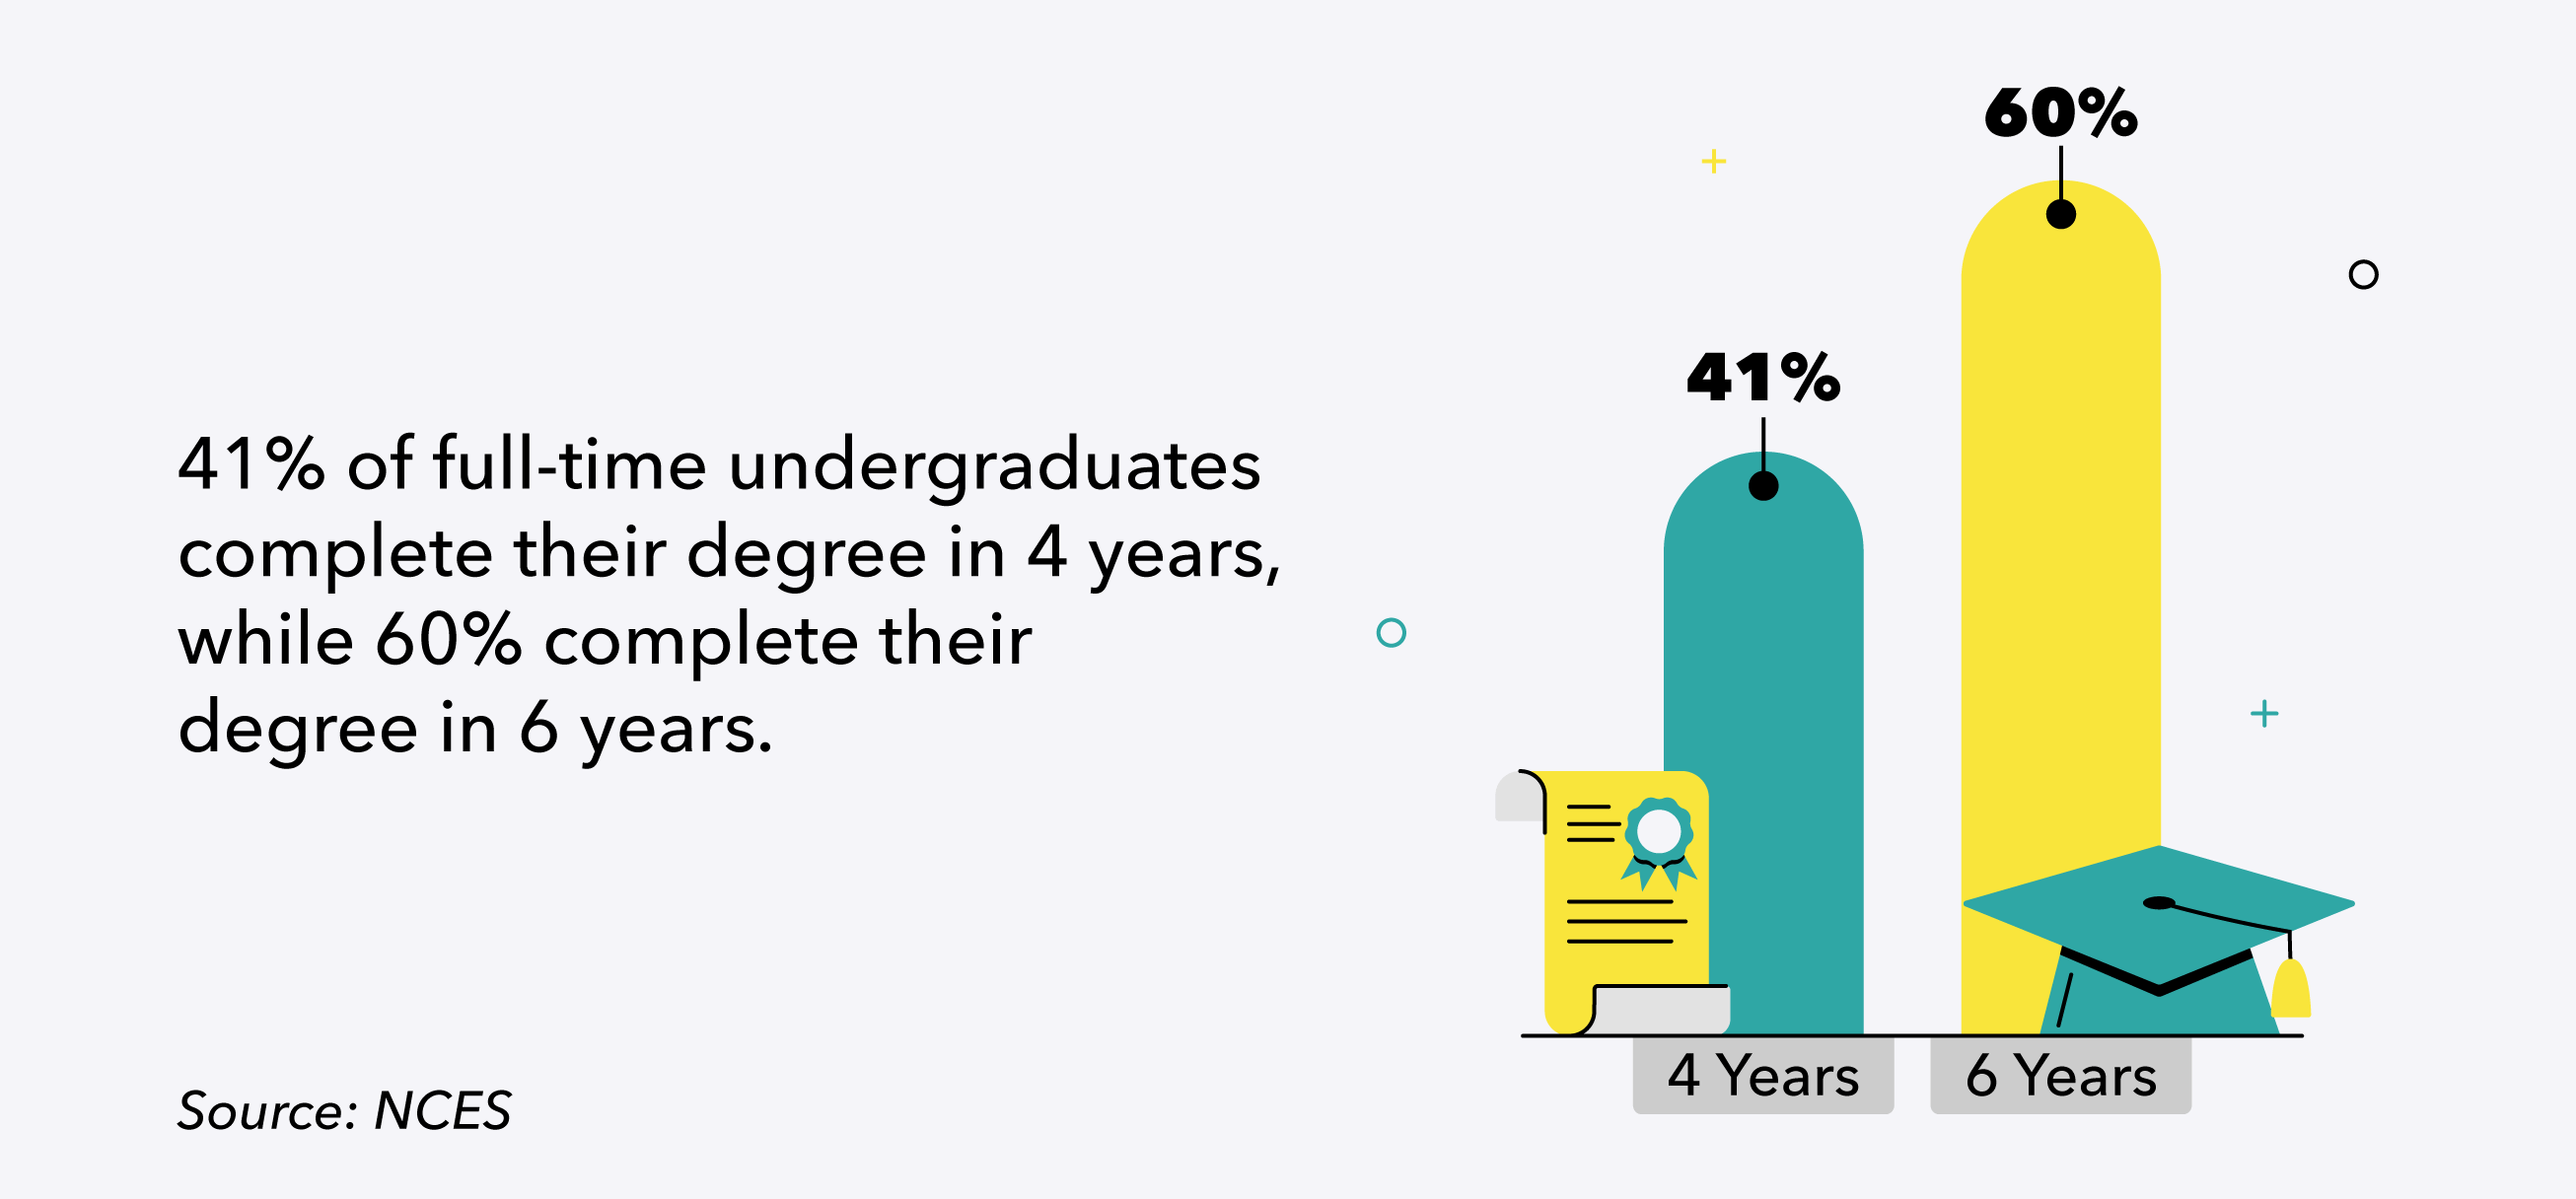 41% of full-time undergraduates complete their degree in 4 years, while 60% take 6 years.